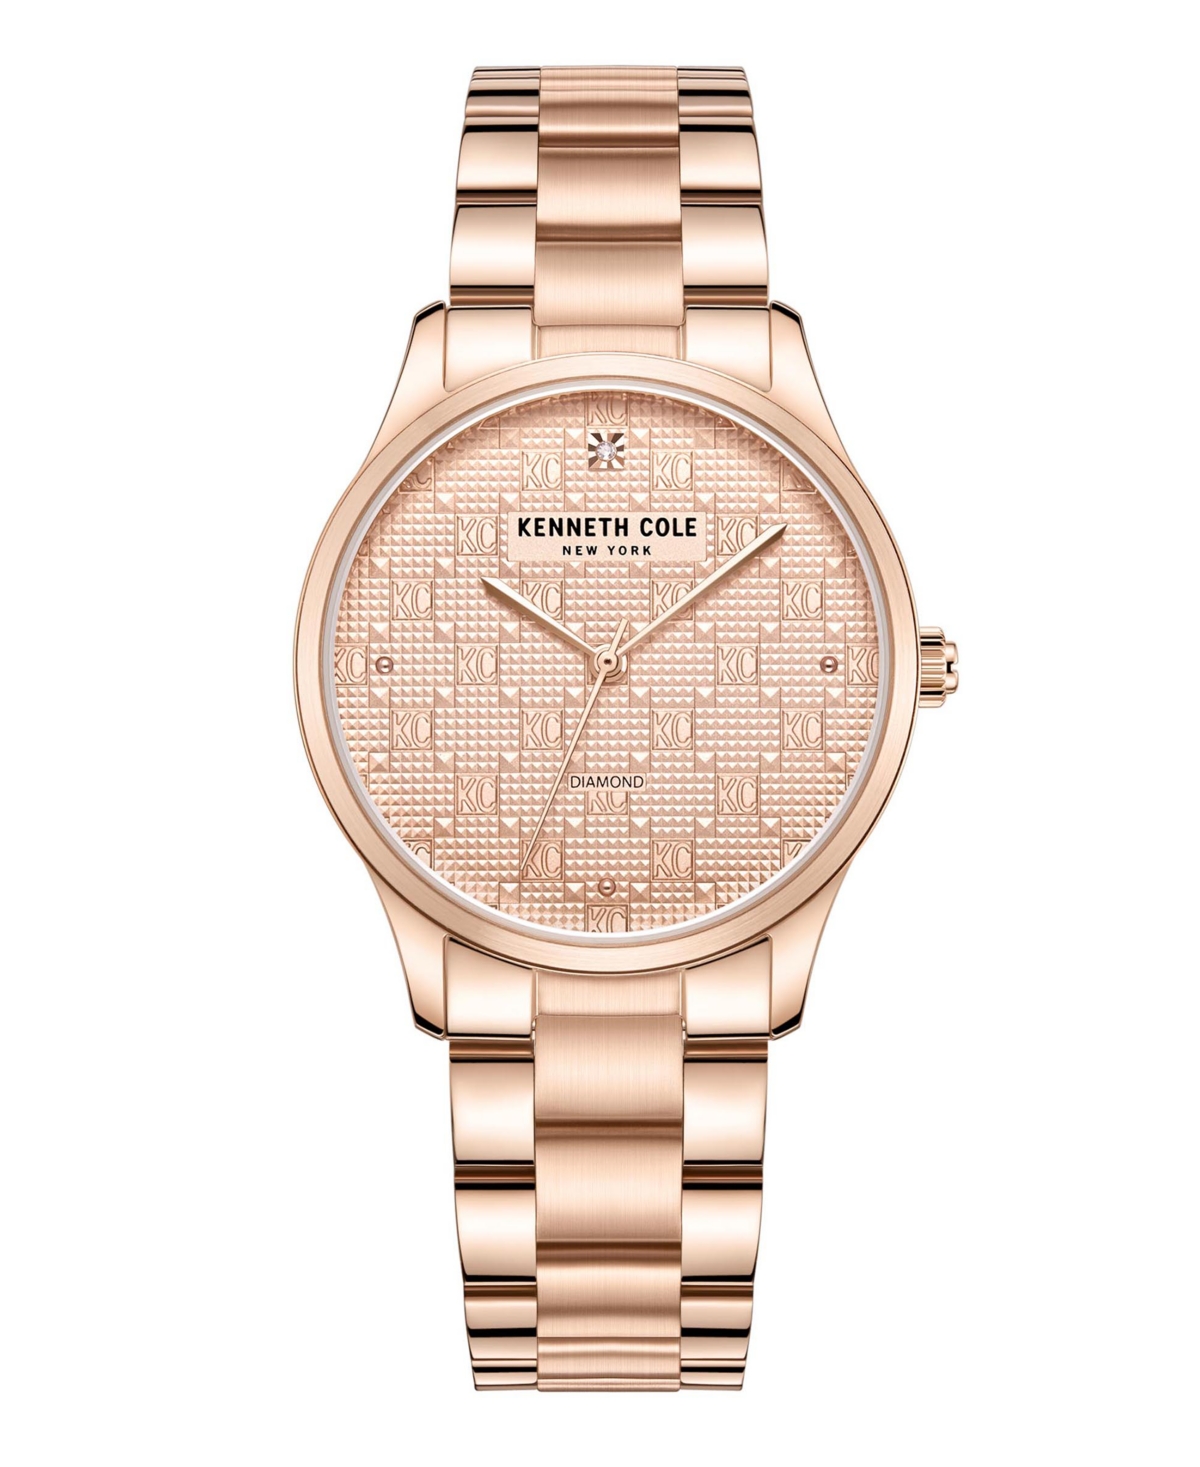 Women's Modern Classic Rose Gold-Tone Stainless Steel Watch, 34.5mm - Rose Gold